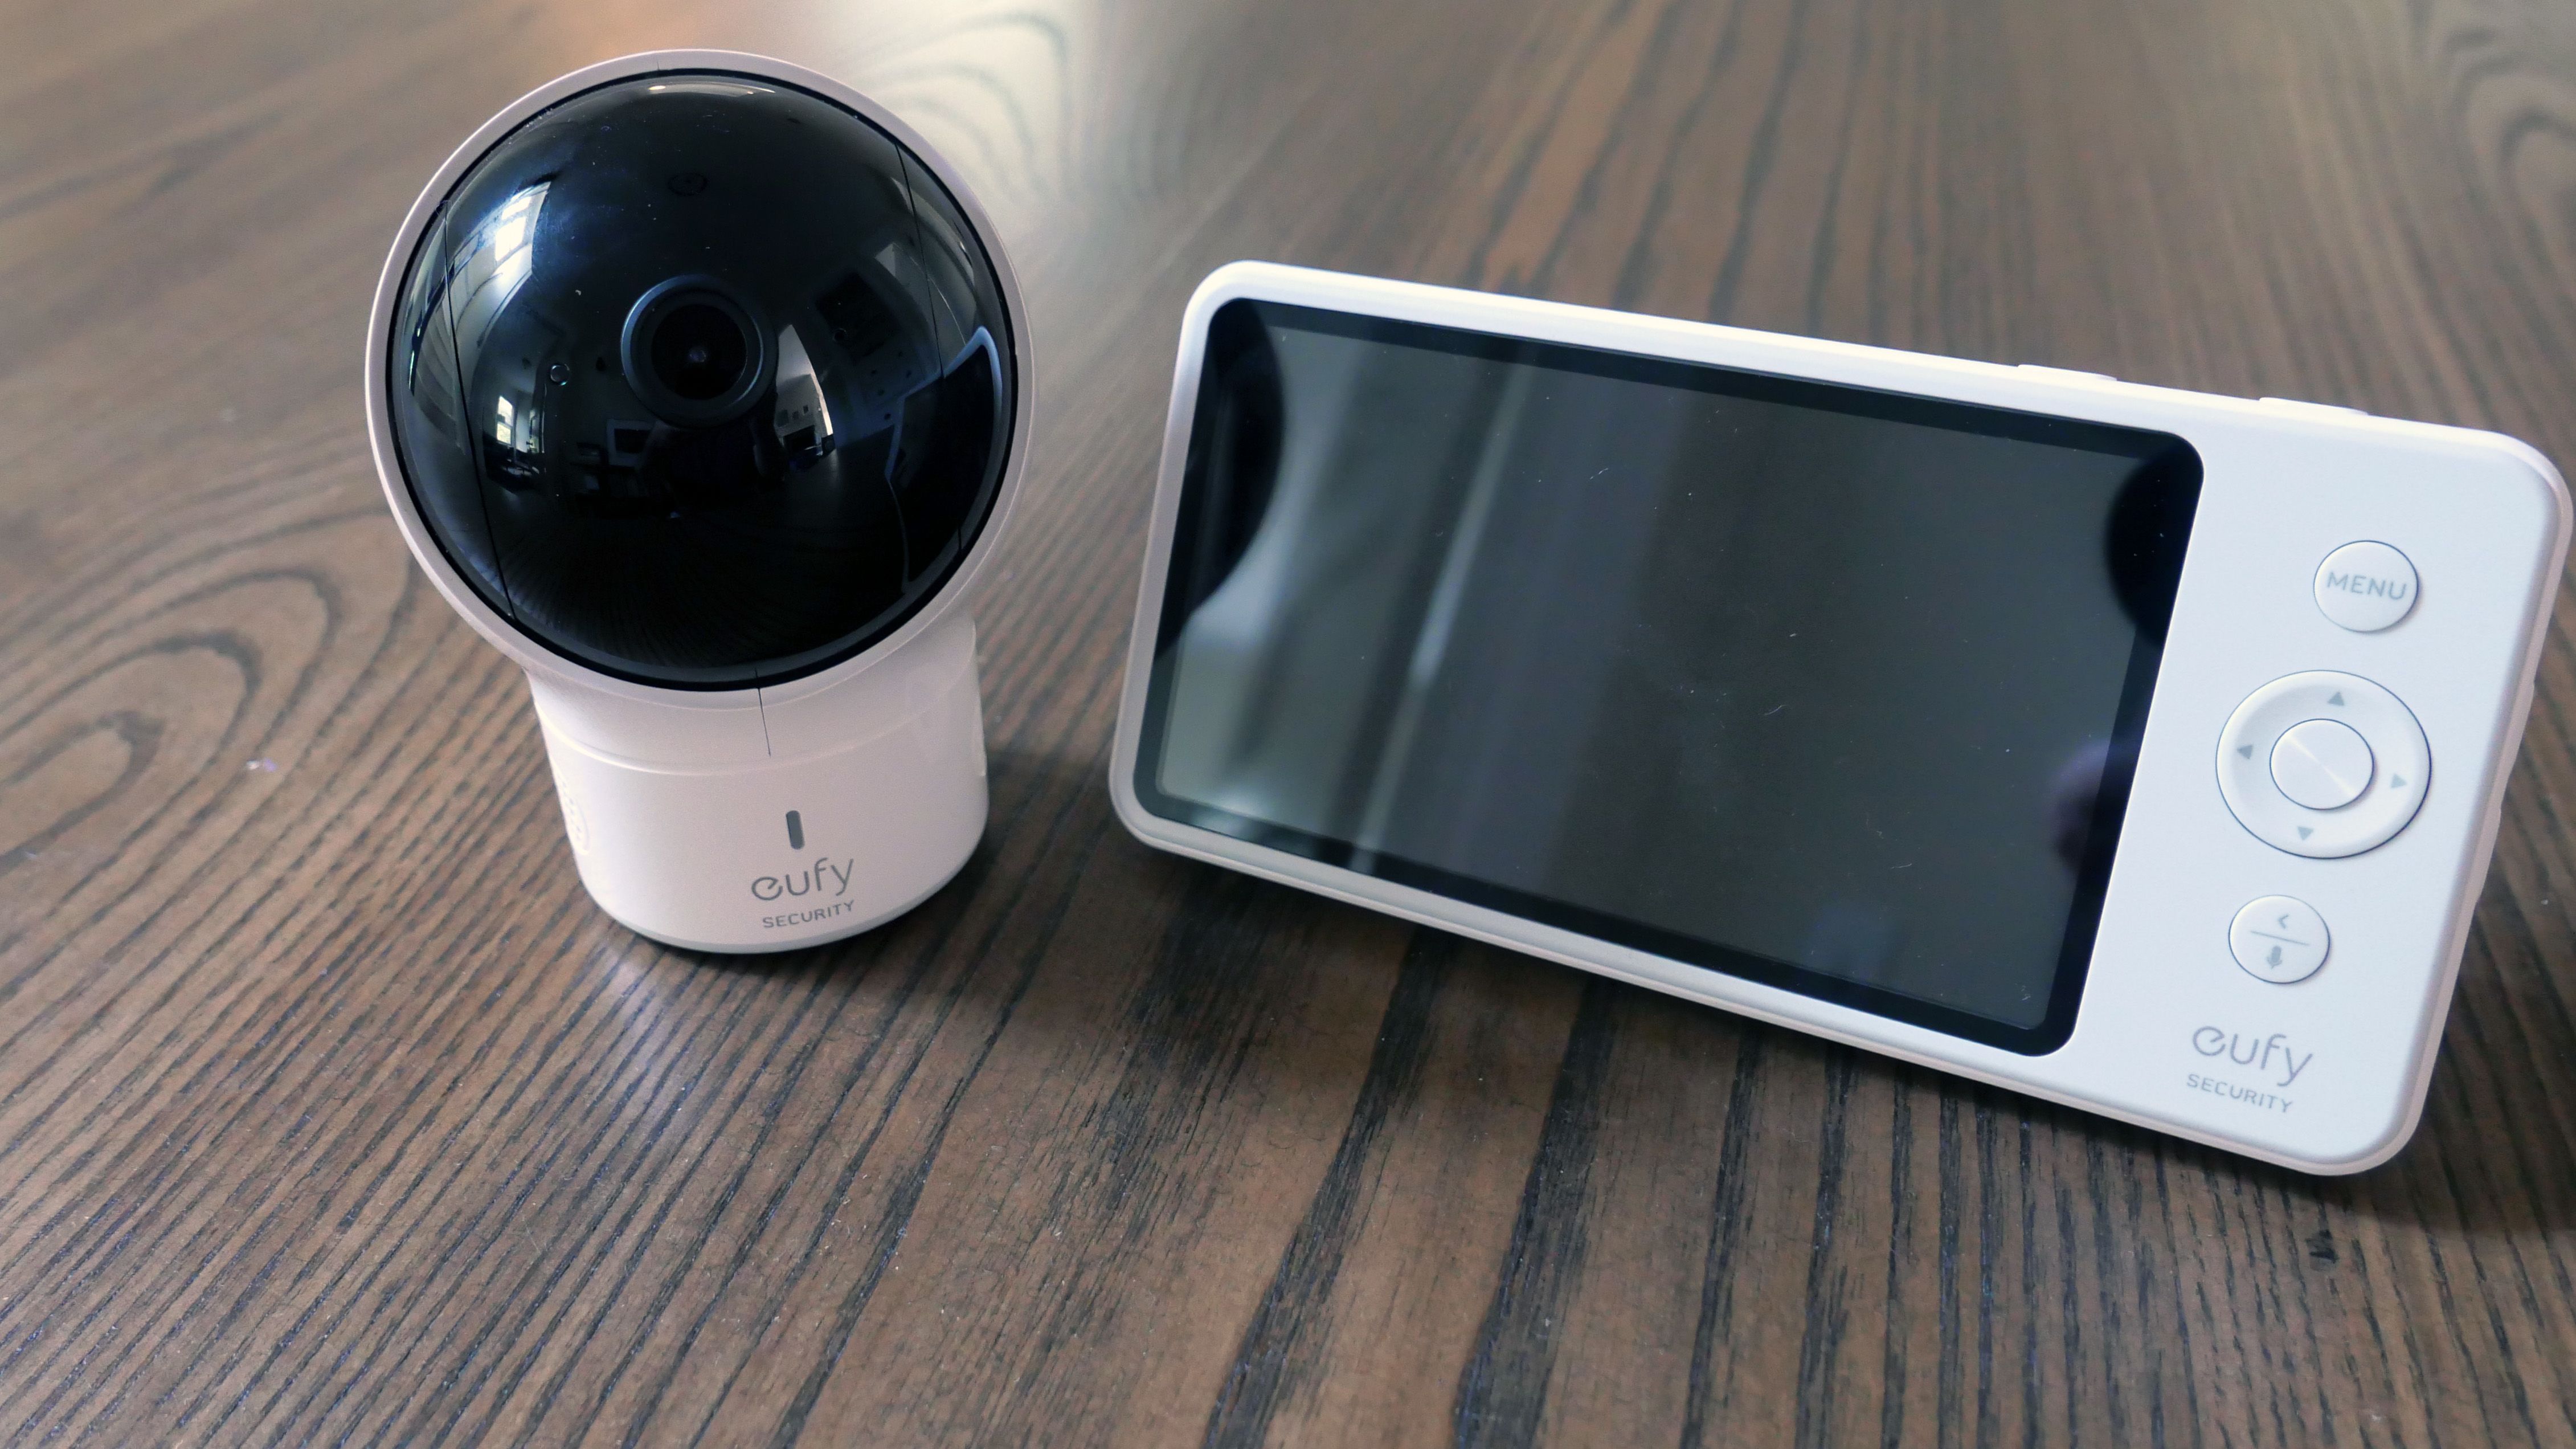 Eufy SpaceView Video Baby Monitor Review